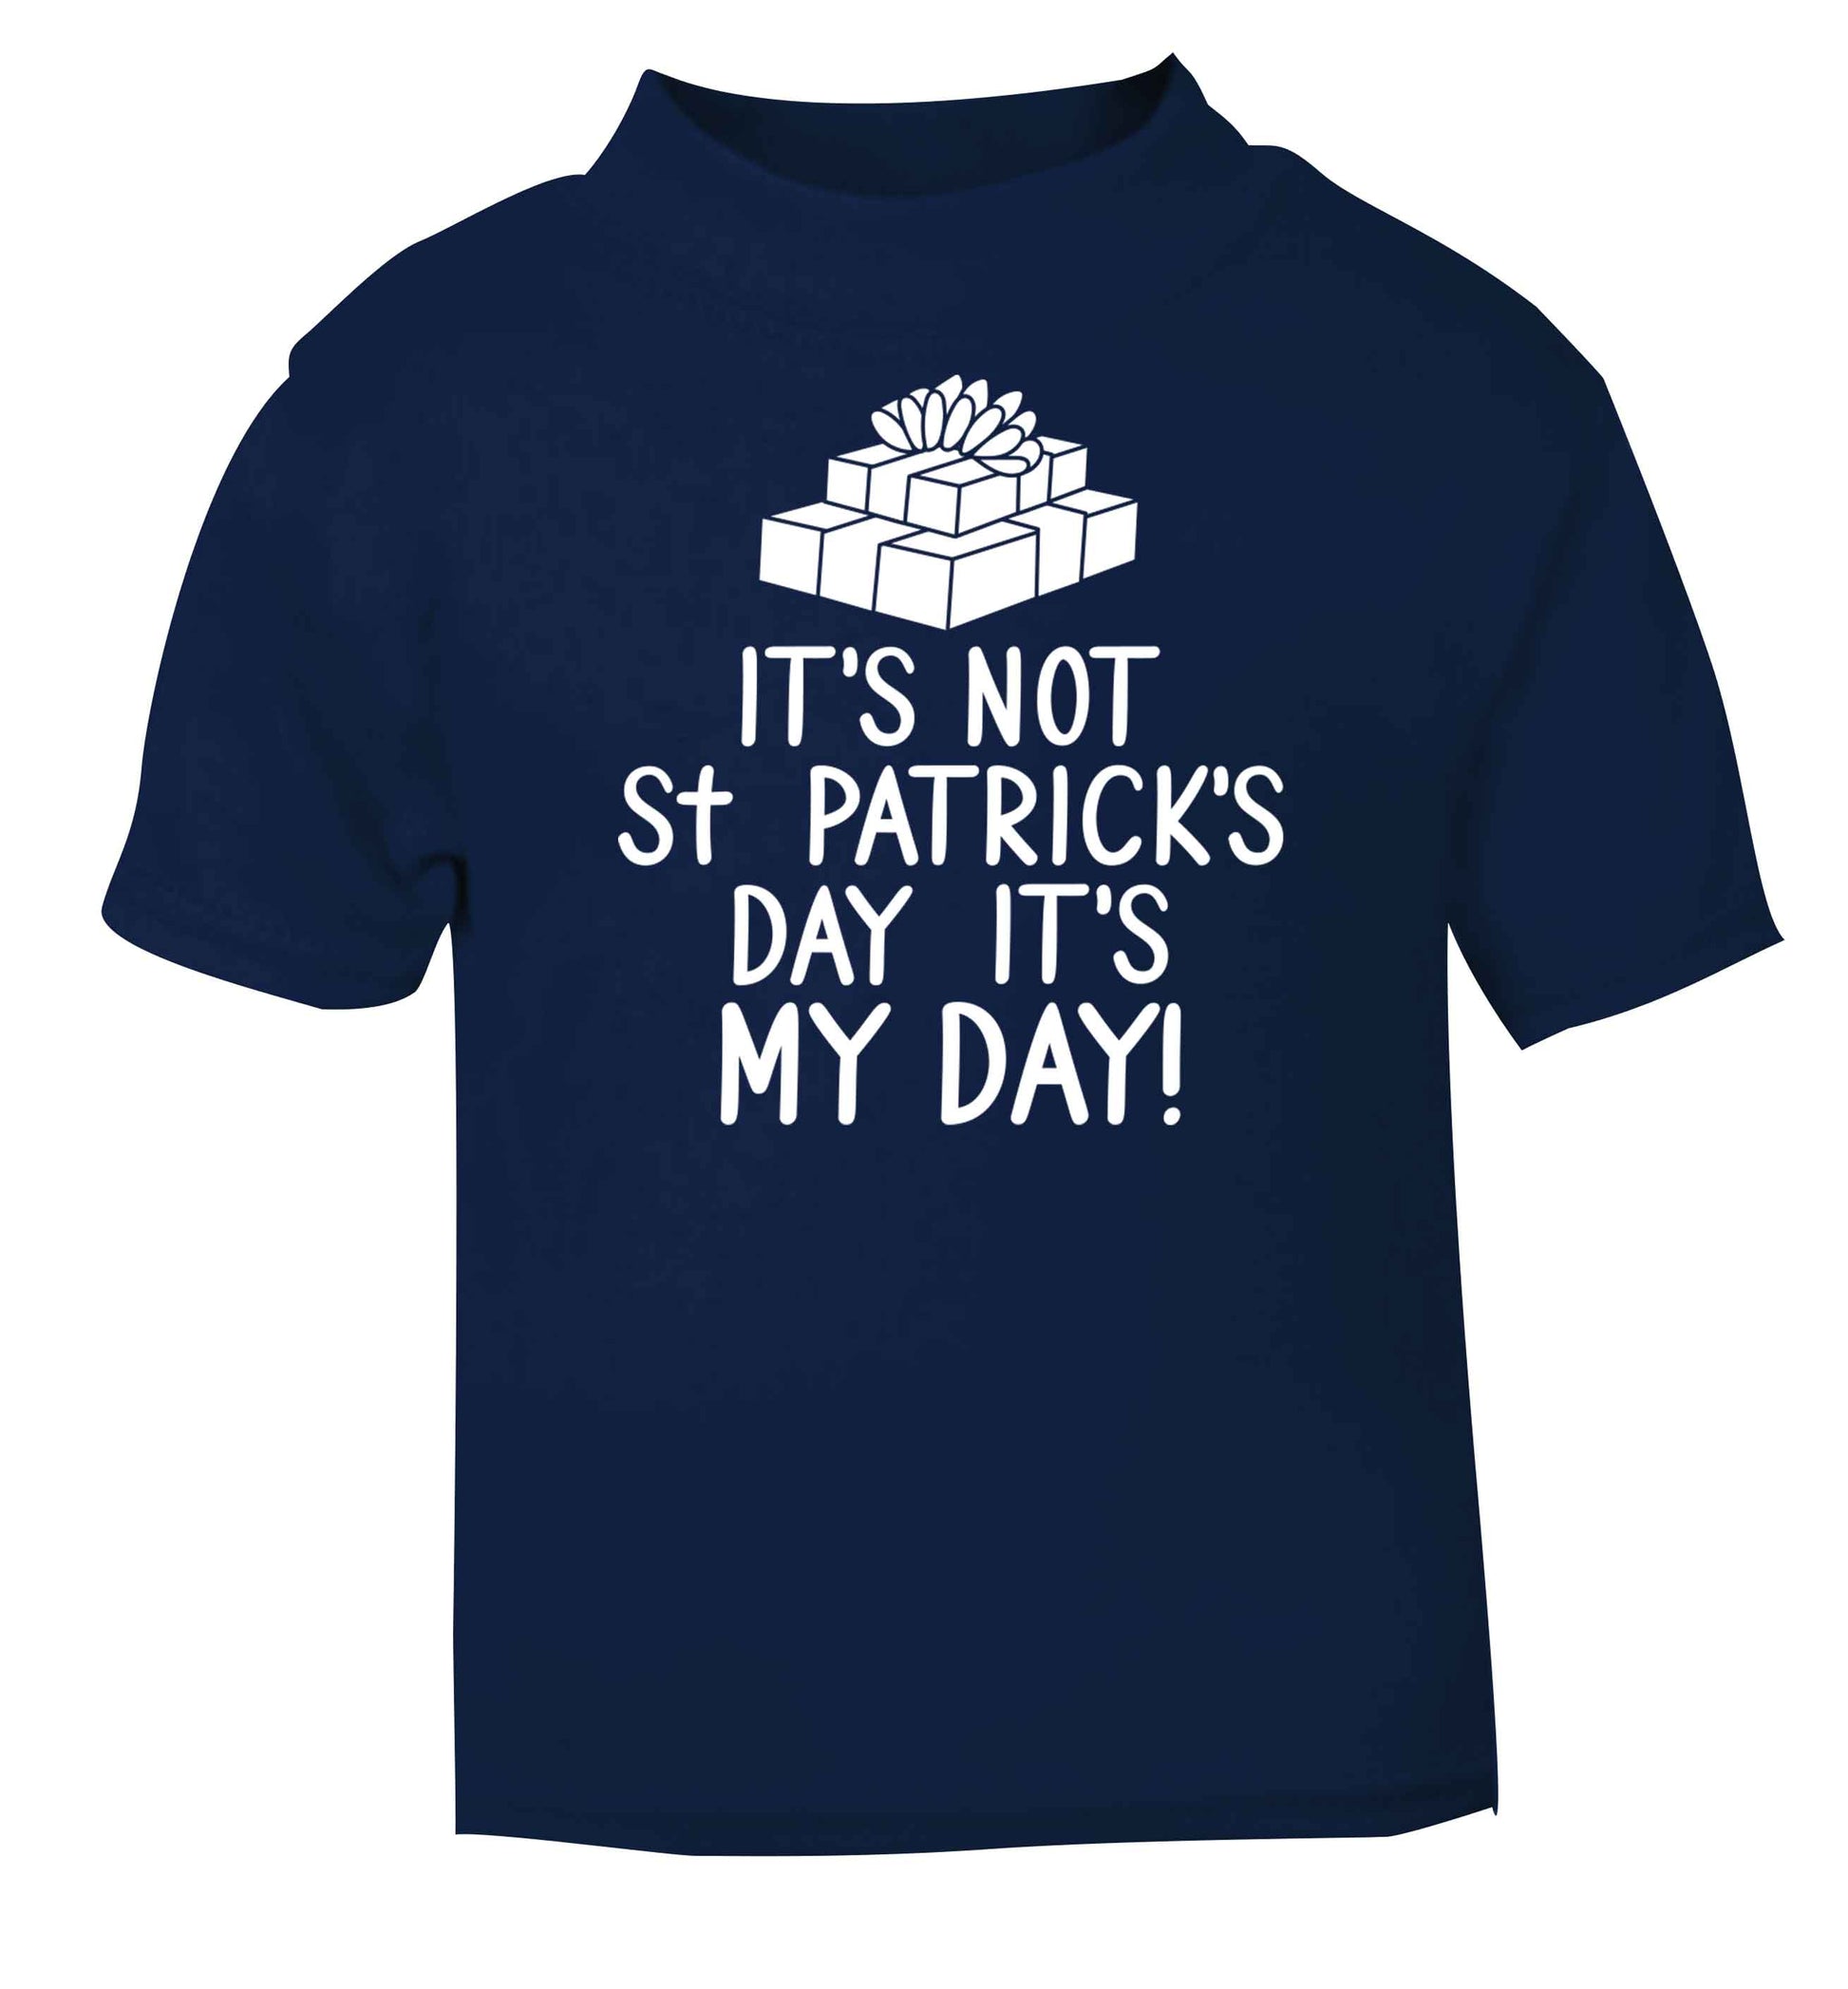 Funny gifts for your mum on mother's dayor her birthday! It's not St Patricks day it's my day navy baby toddler Tshirt 2 Years